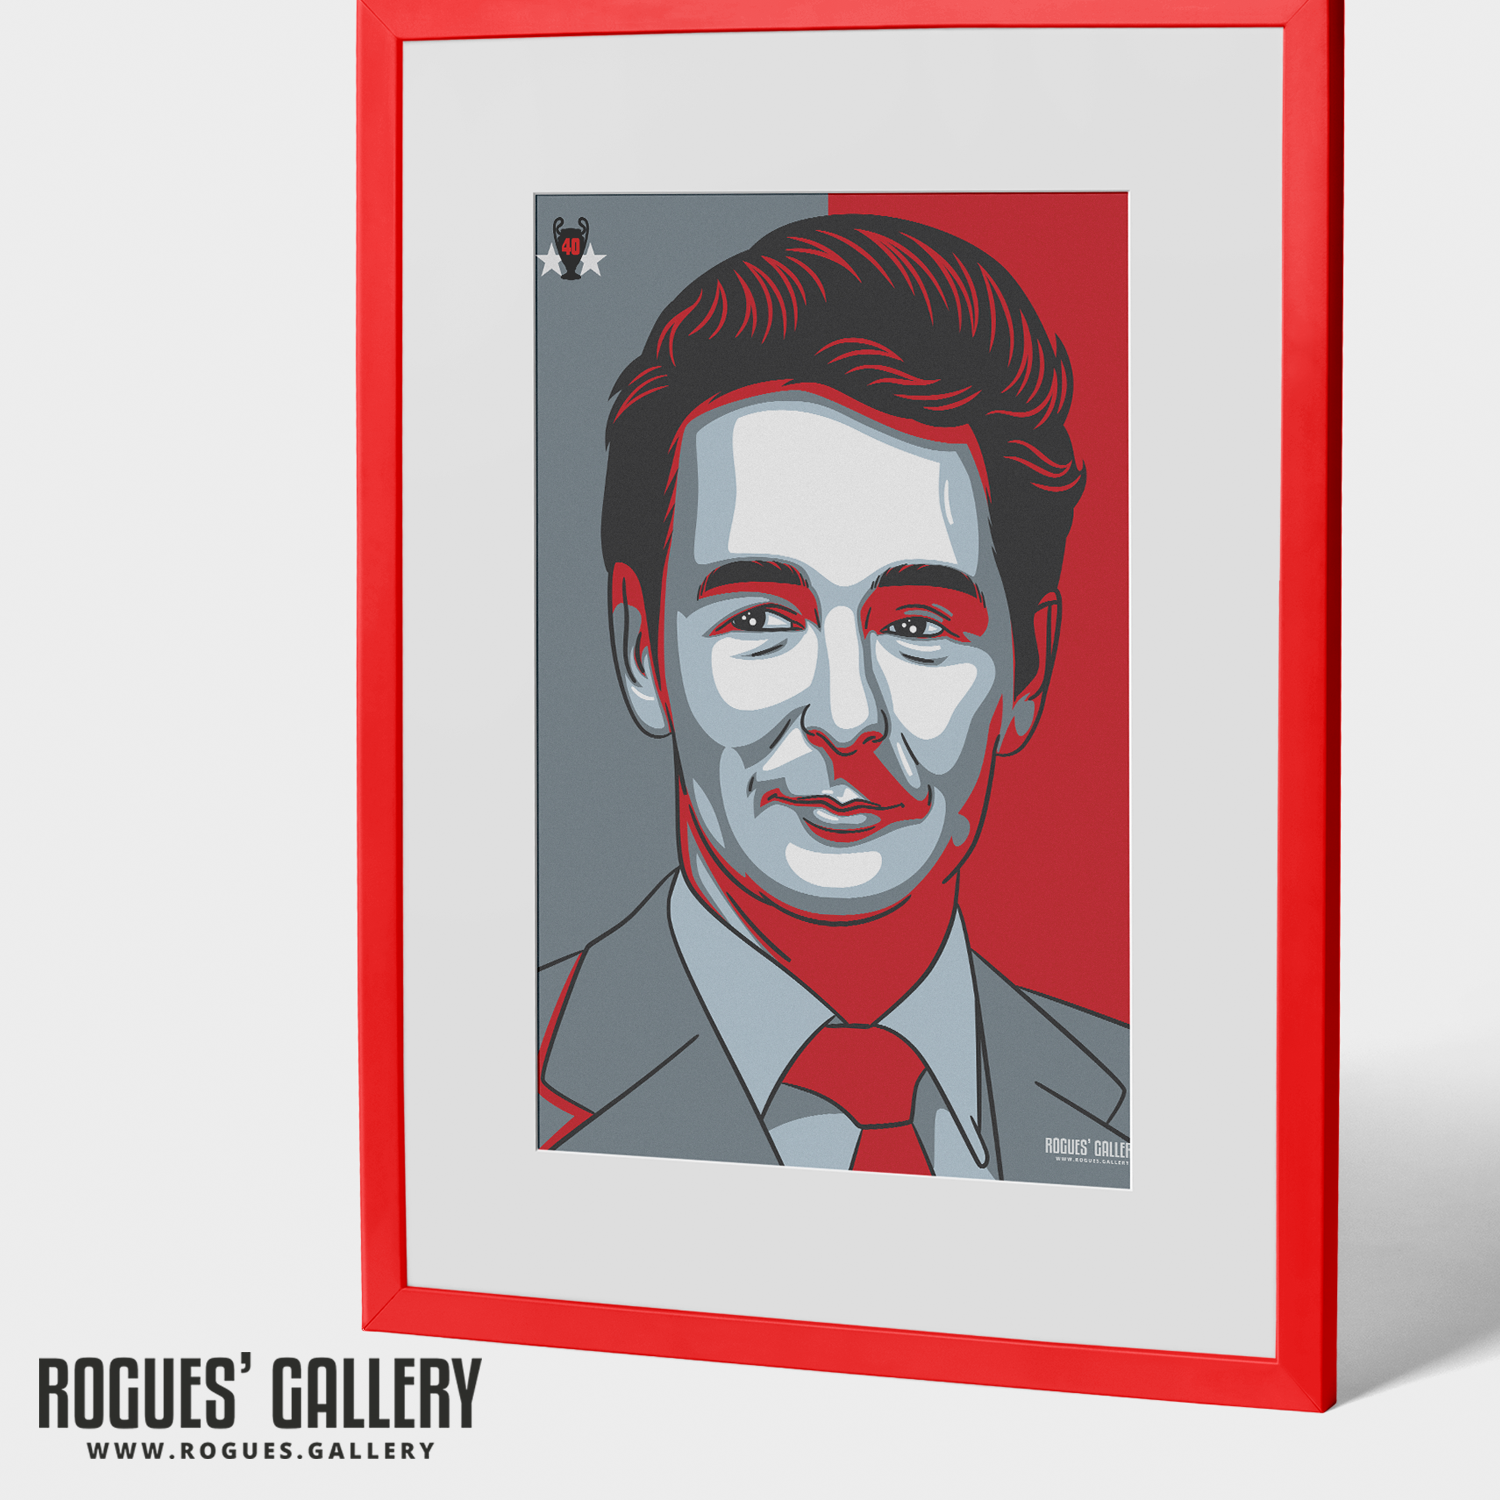 Brian Clough manager Nottingham Forest manager 40 years European Cup 1979 Winner genius OBE perfect dictator